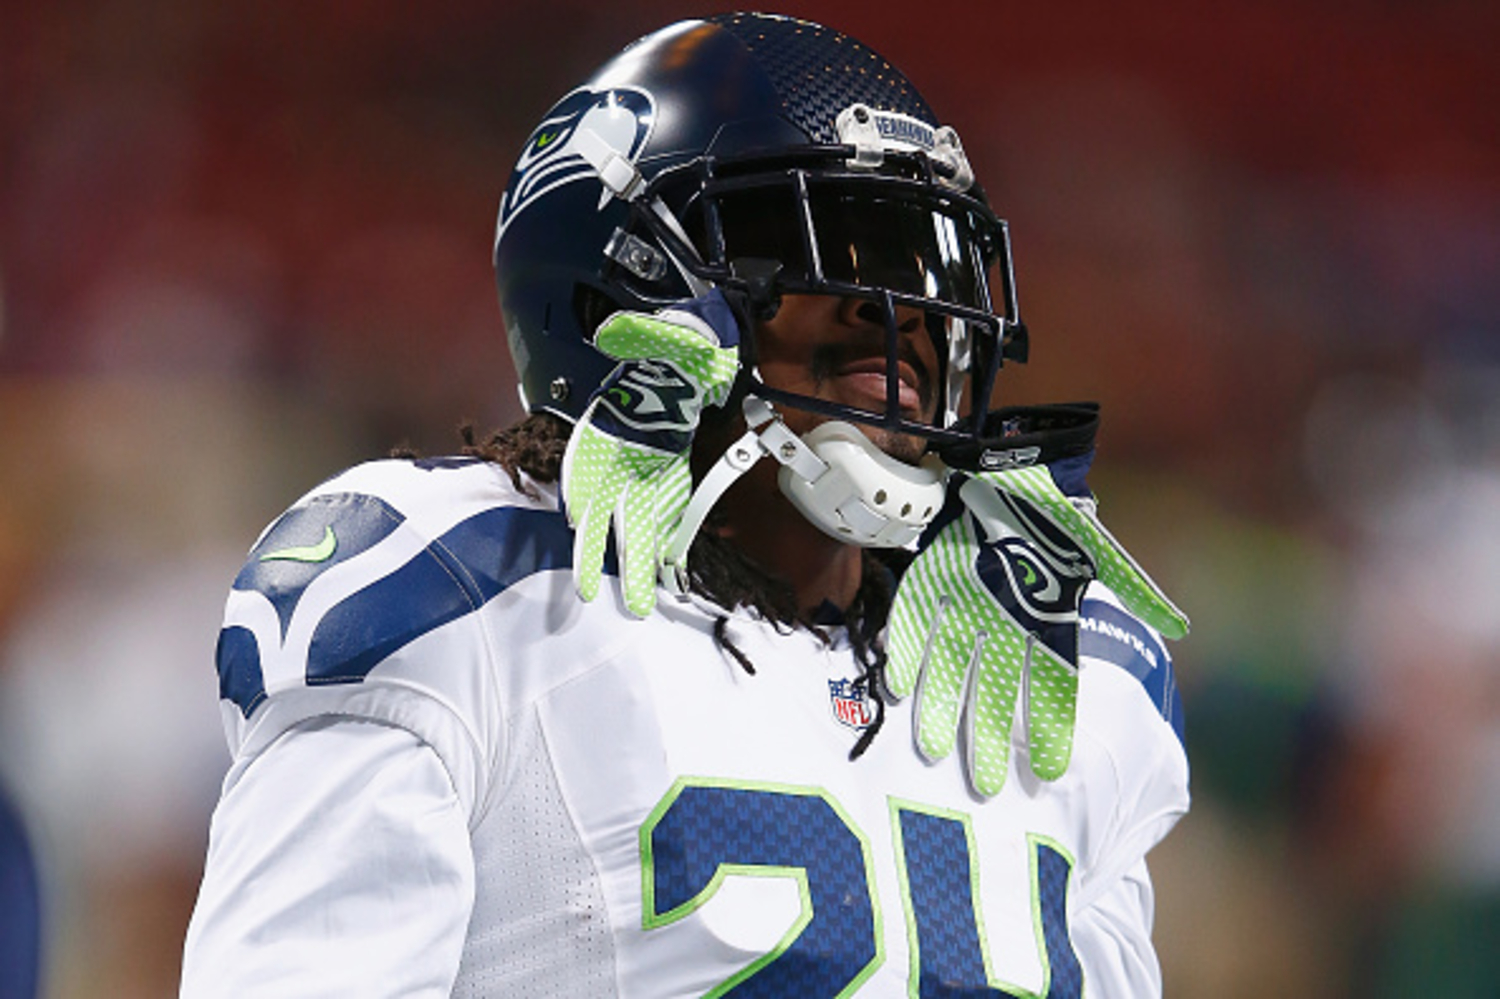 Marshawn Lynch May Be Done Playing Football, But He Continues to Impact Lives